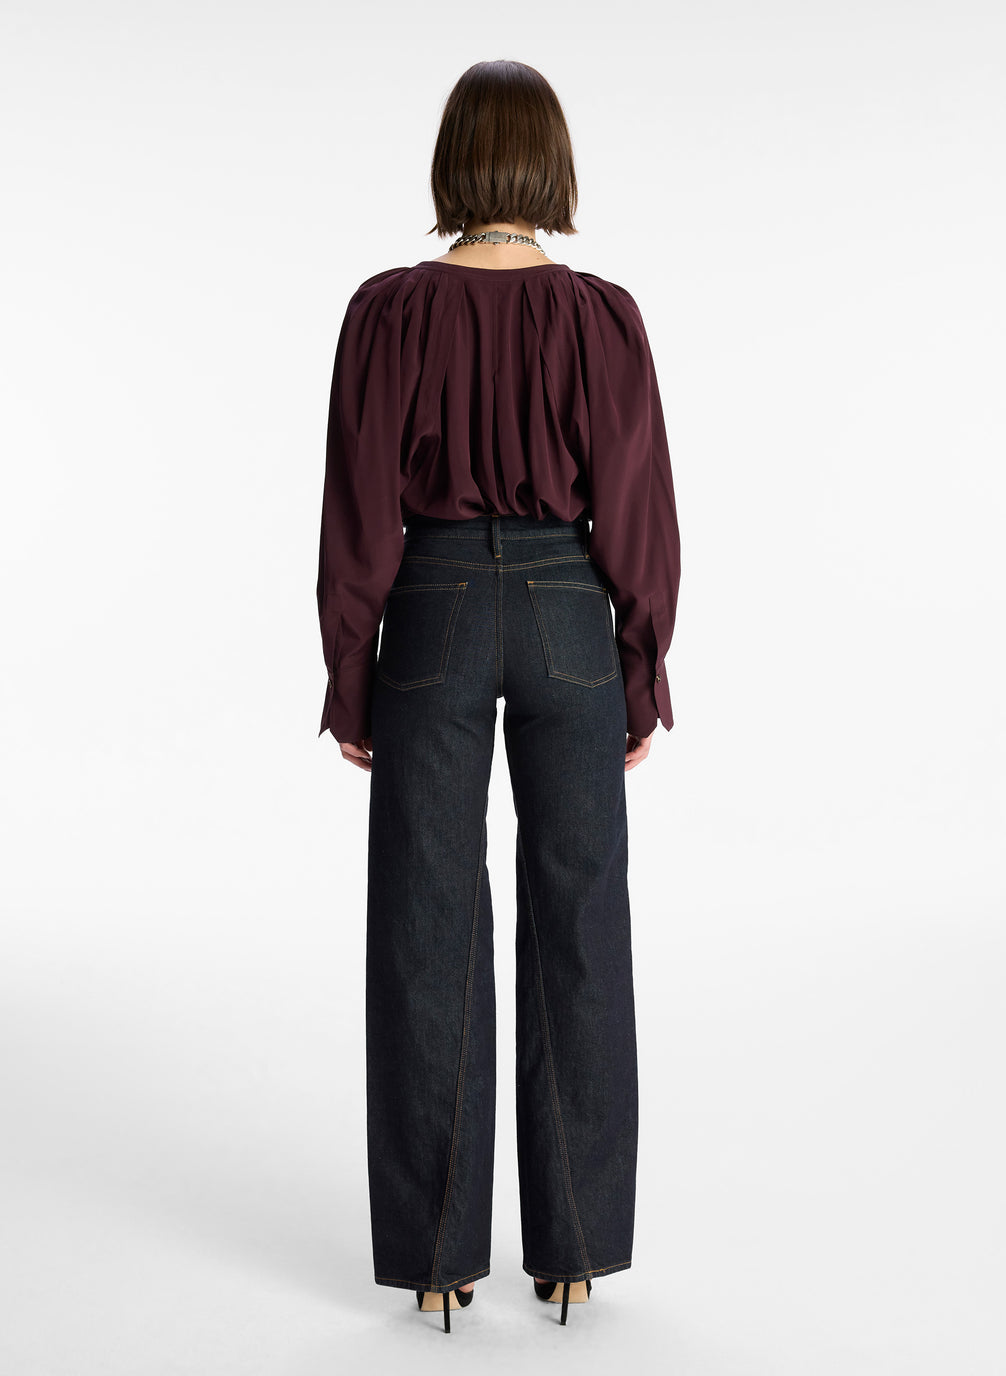 back view of woman wearing burgundy v neck long sleeve silk top and dark wash denim jeans